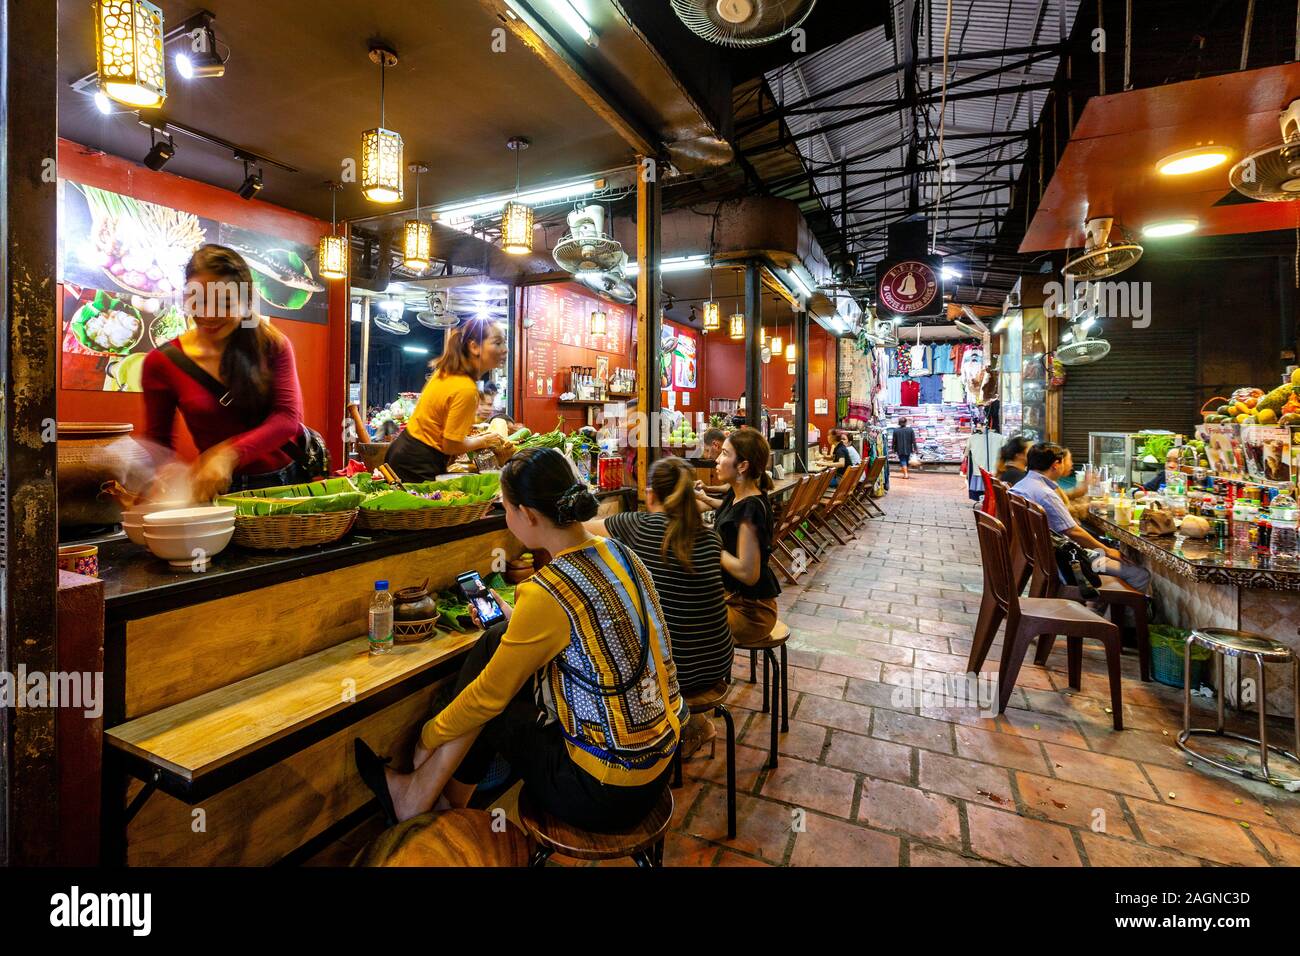 Young Cambodians Eating Lunch At A Cafe In The Russian Market, Phnom Penh, Cambodia. Stock Photo